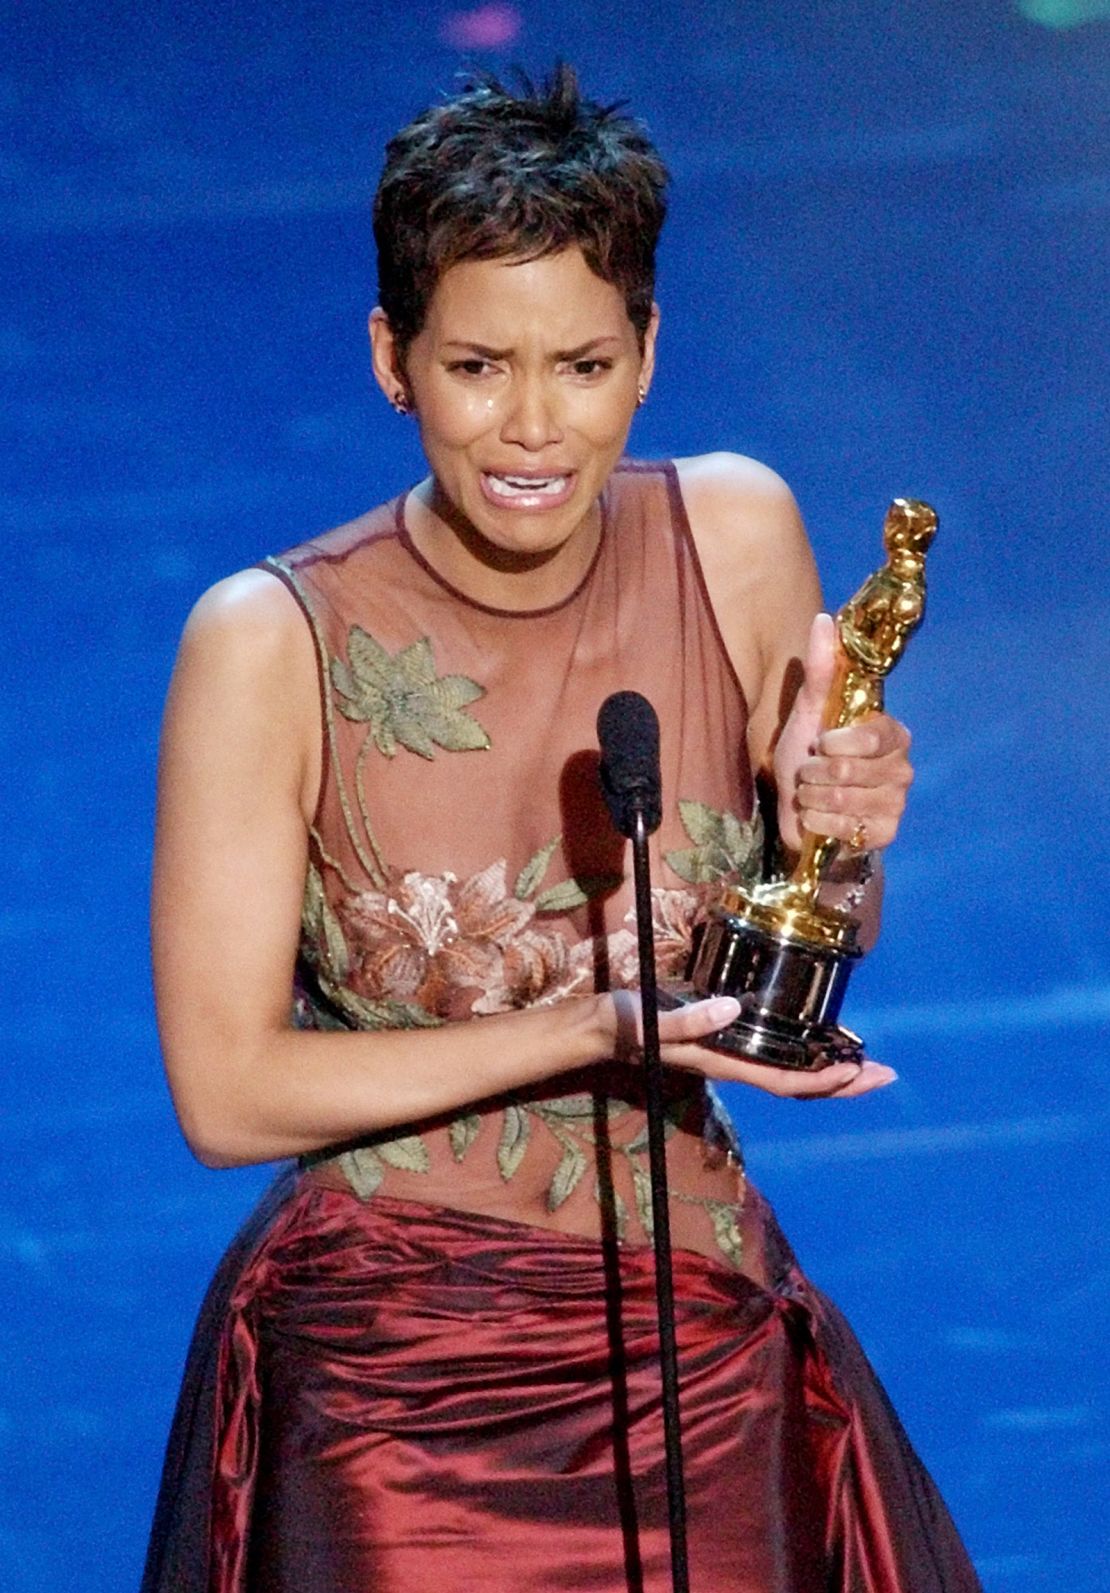 Halle Berry accepts her Oscar for best actress for her role in "Monsters Ball" during the 74th annual Academy Awards in 2002.